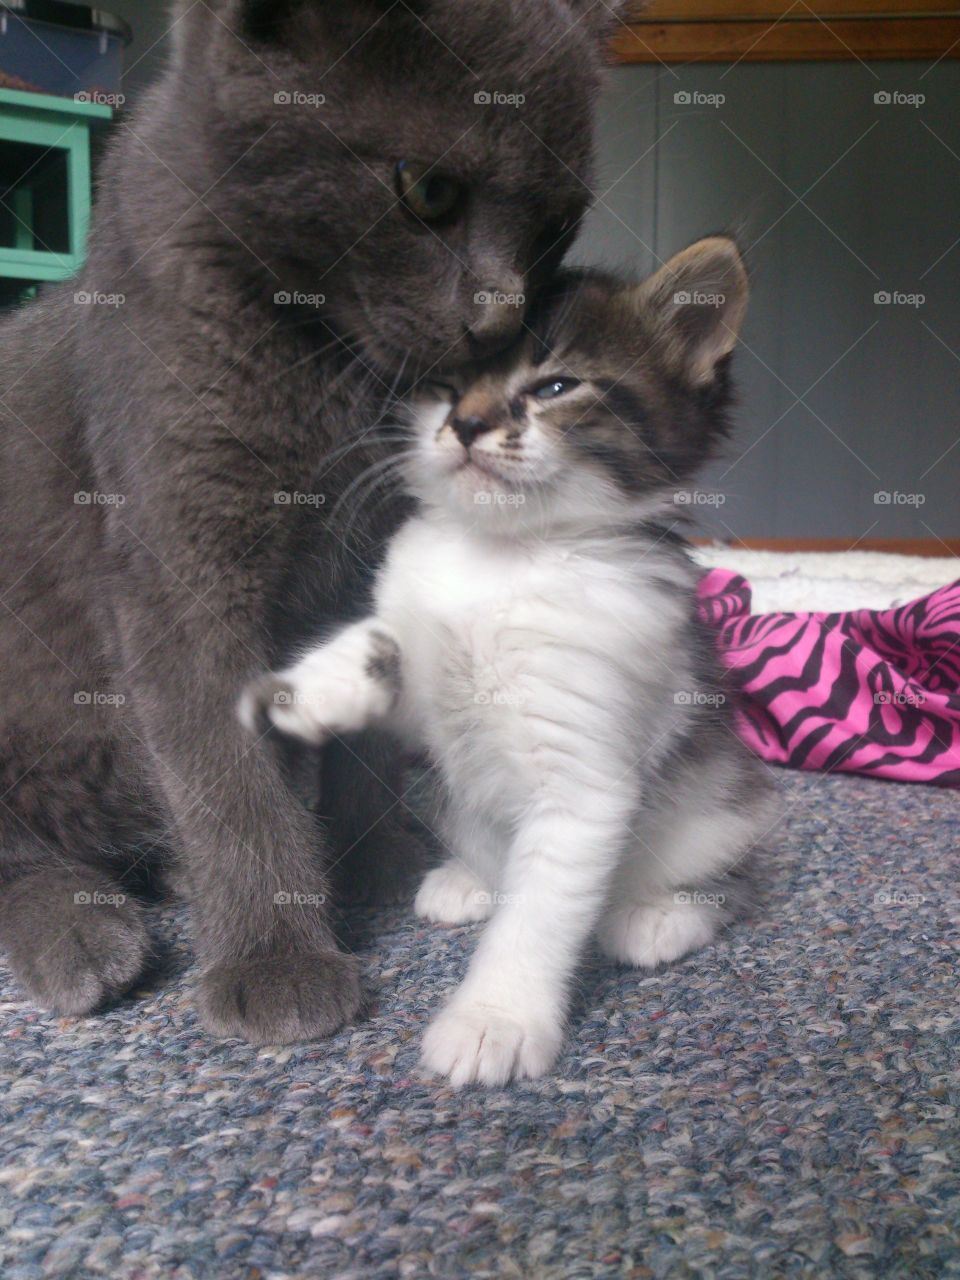 Kisses. My kitties love each other